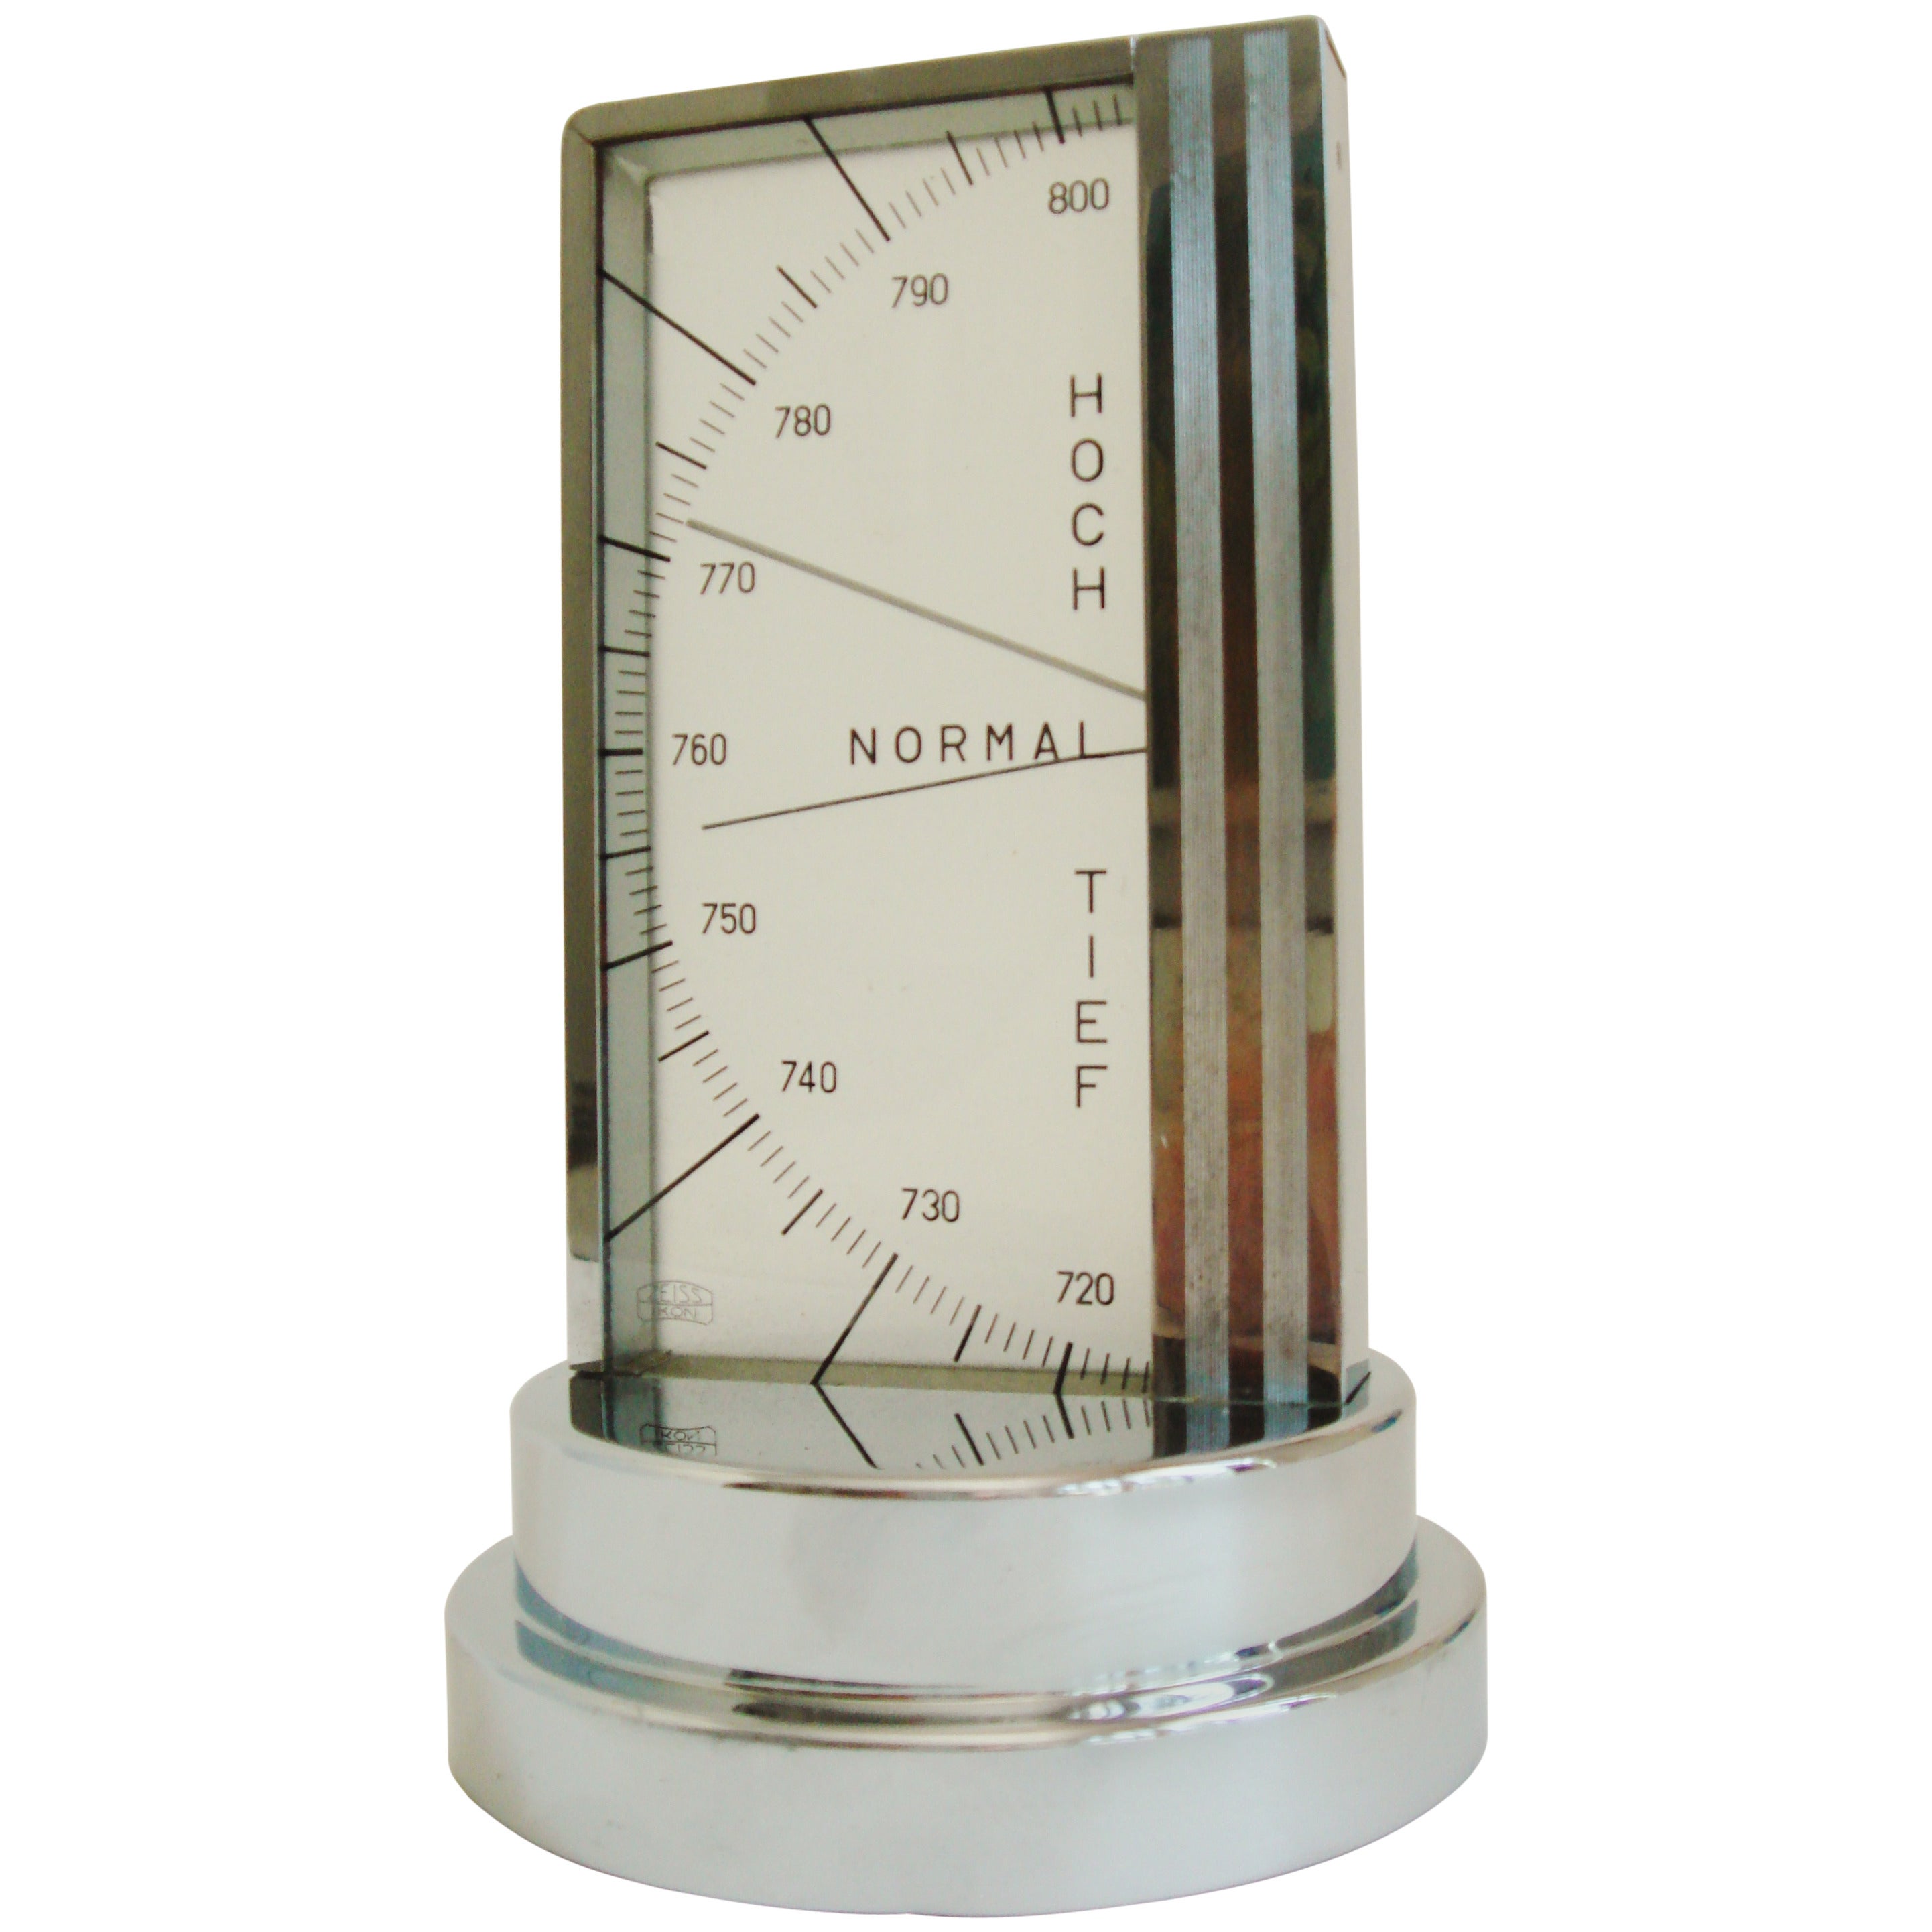 High Quality German Art Deco Chrome Plated Aneroid Desk Barometer by Zeiss Ikon.